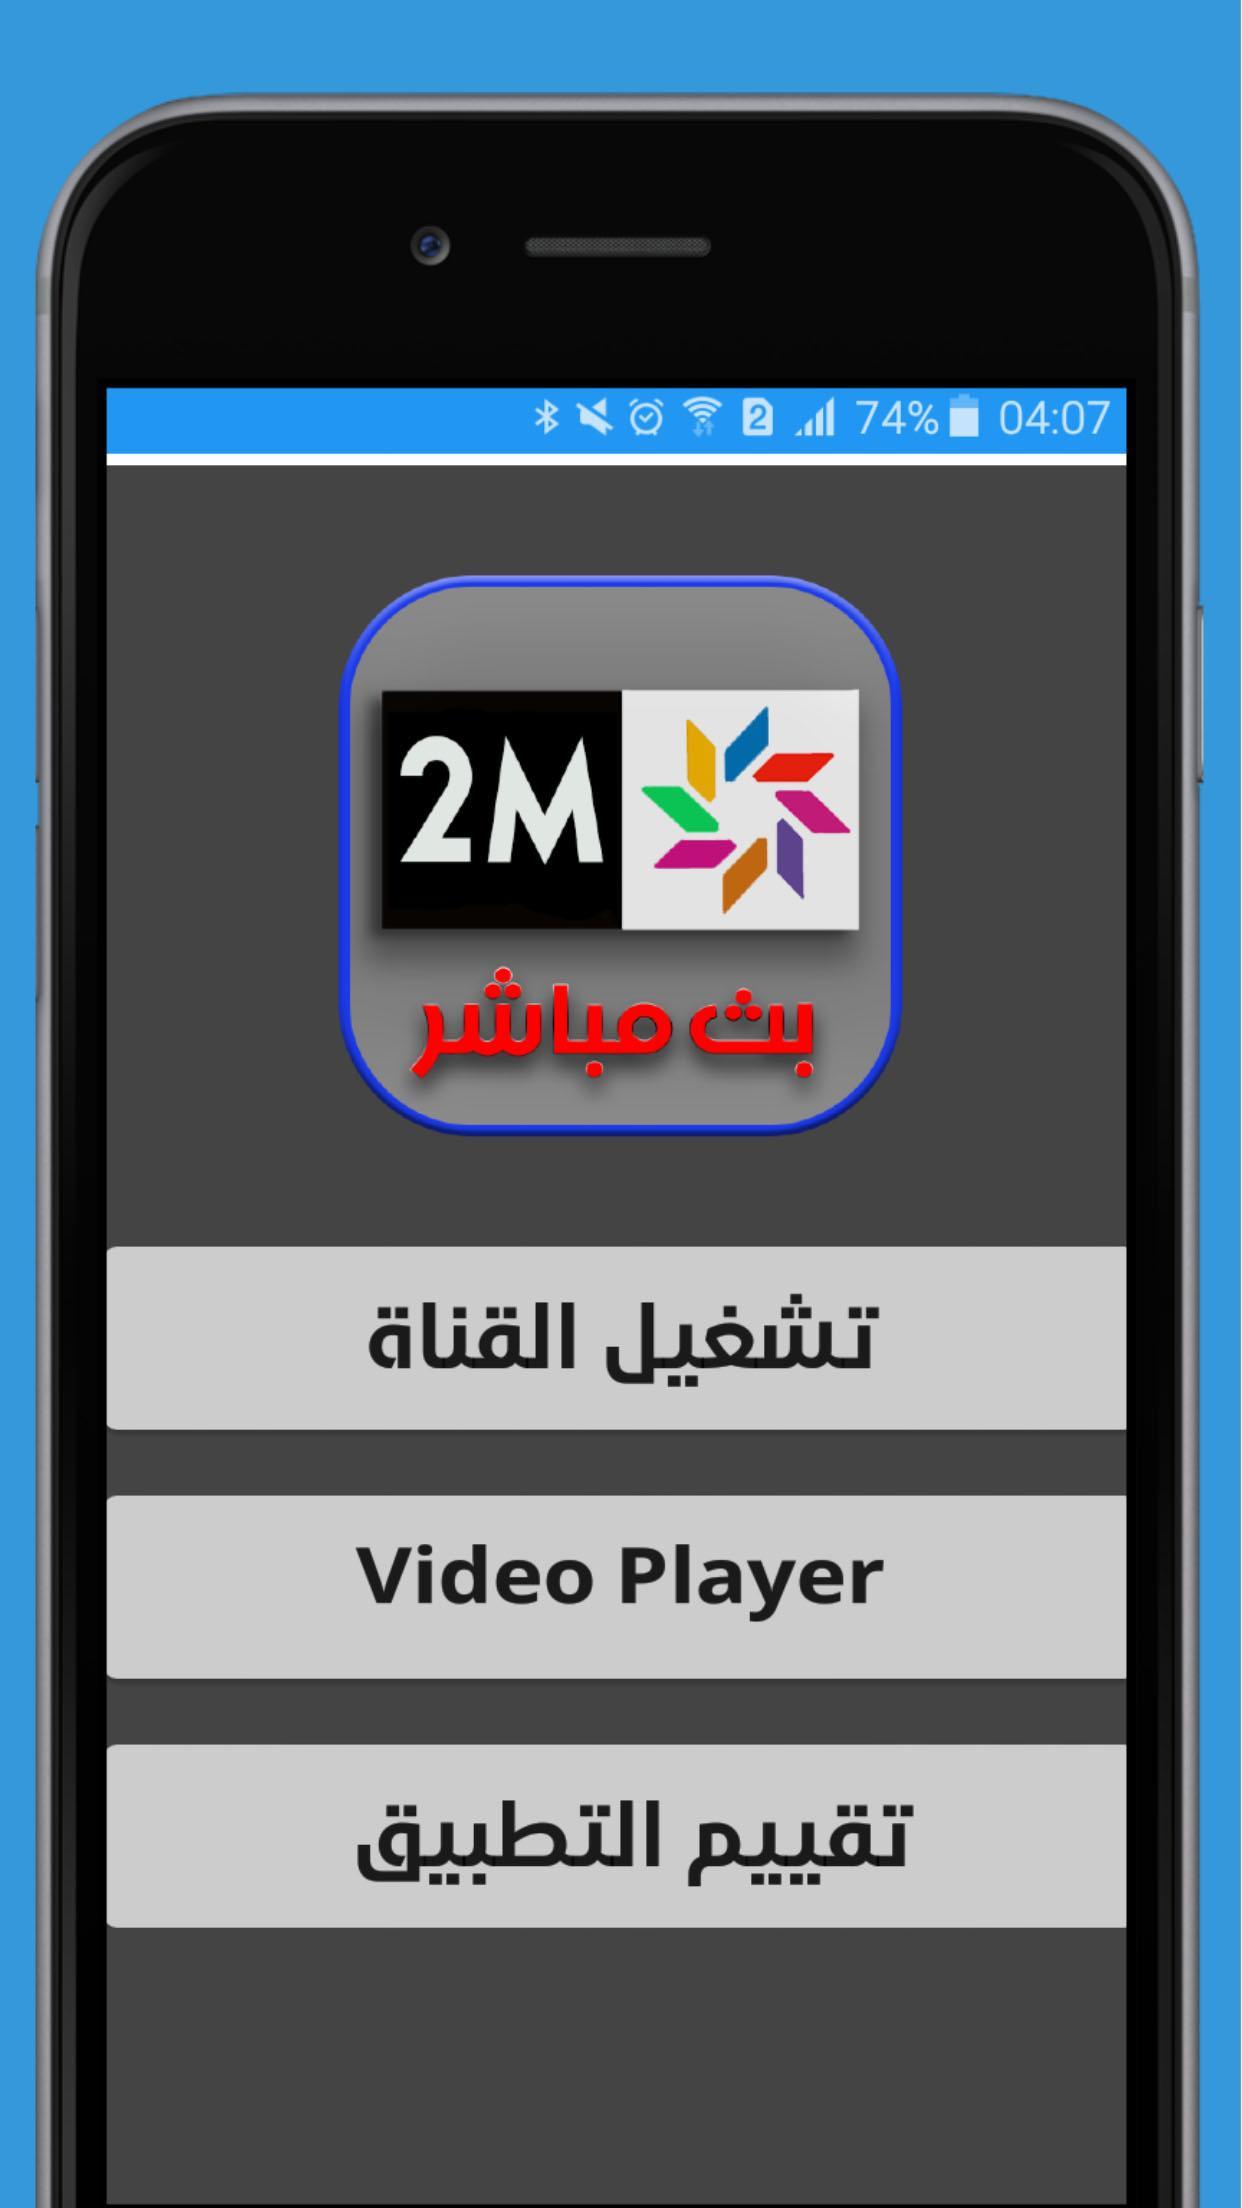 2M Maroc Live 2019 for Android - APK Download